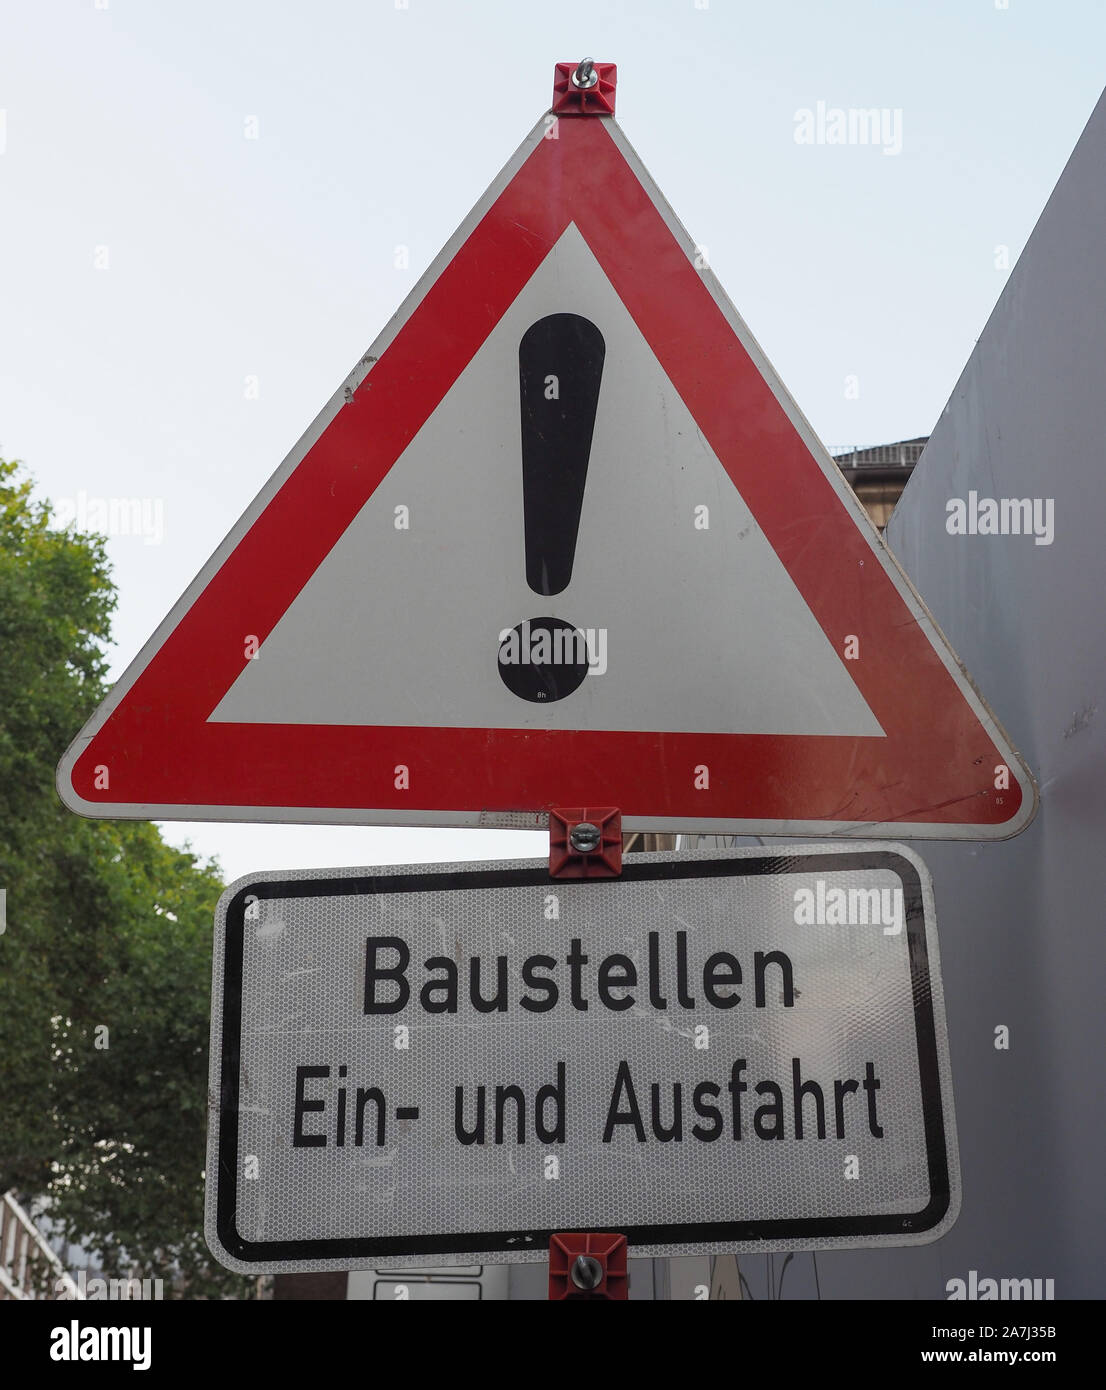 Baustellen Einfahrt und Ausfahrt (meaning Construction sites in and out) sign Stock Photo